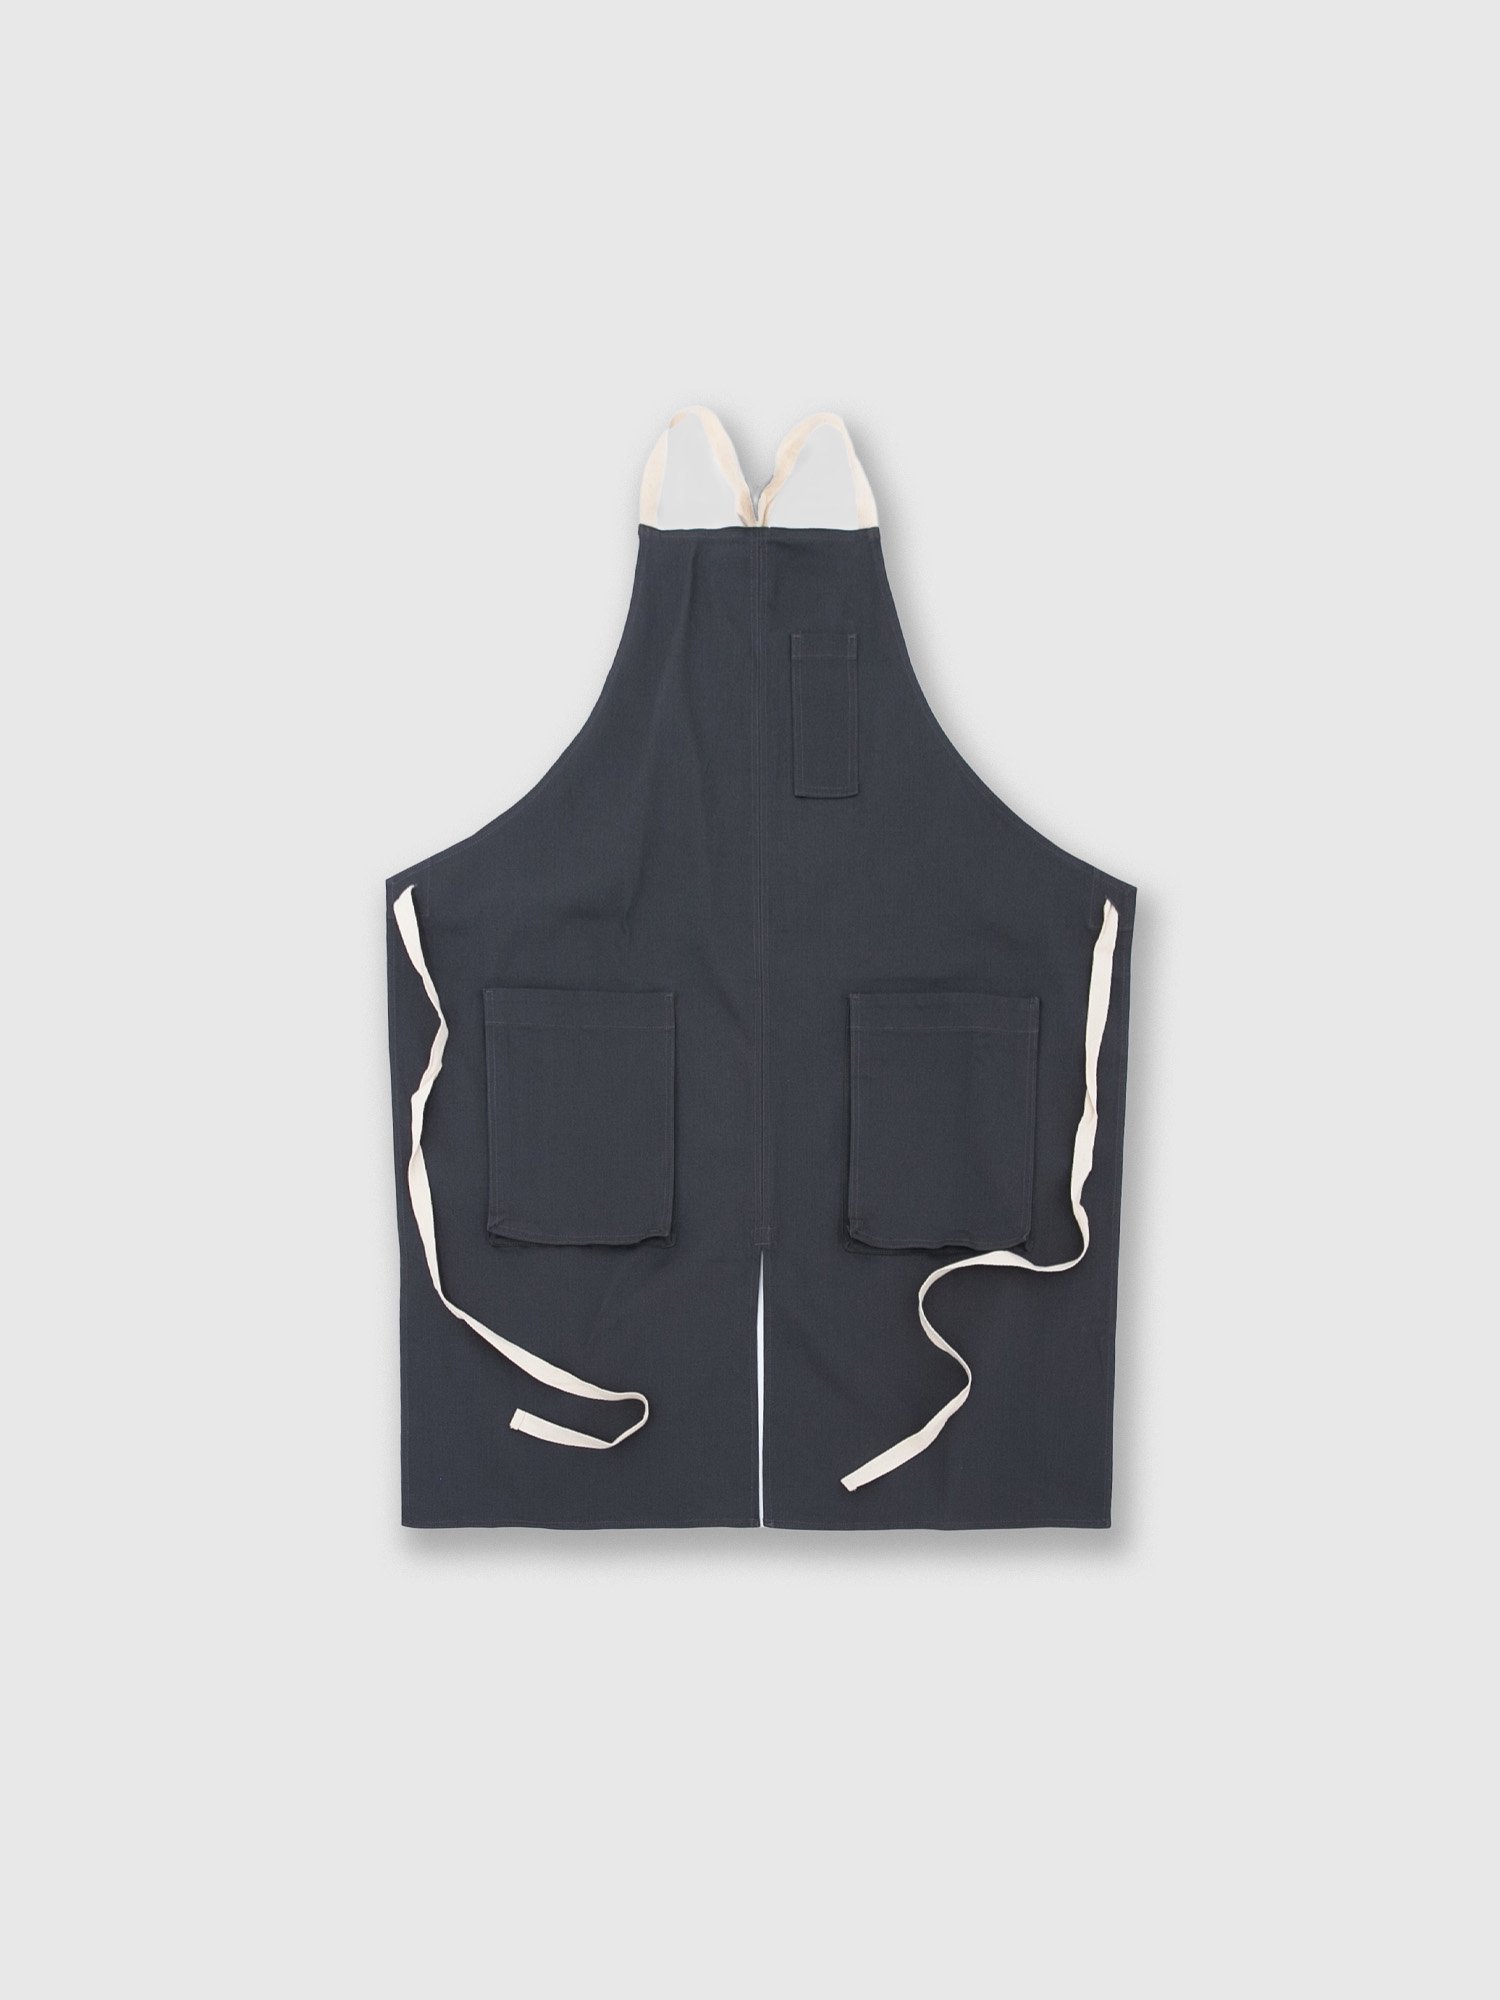 GOOD COOK TOOL c/#4<br />/Apron<br />/Gray navy